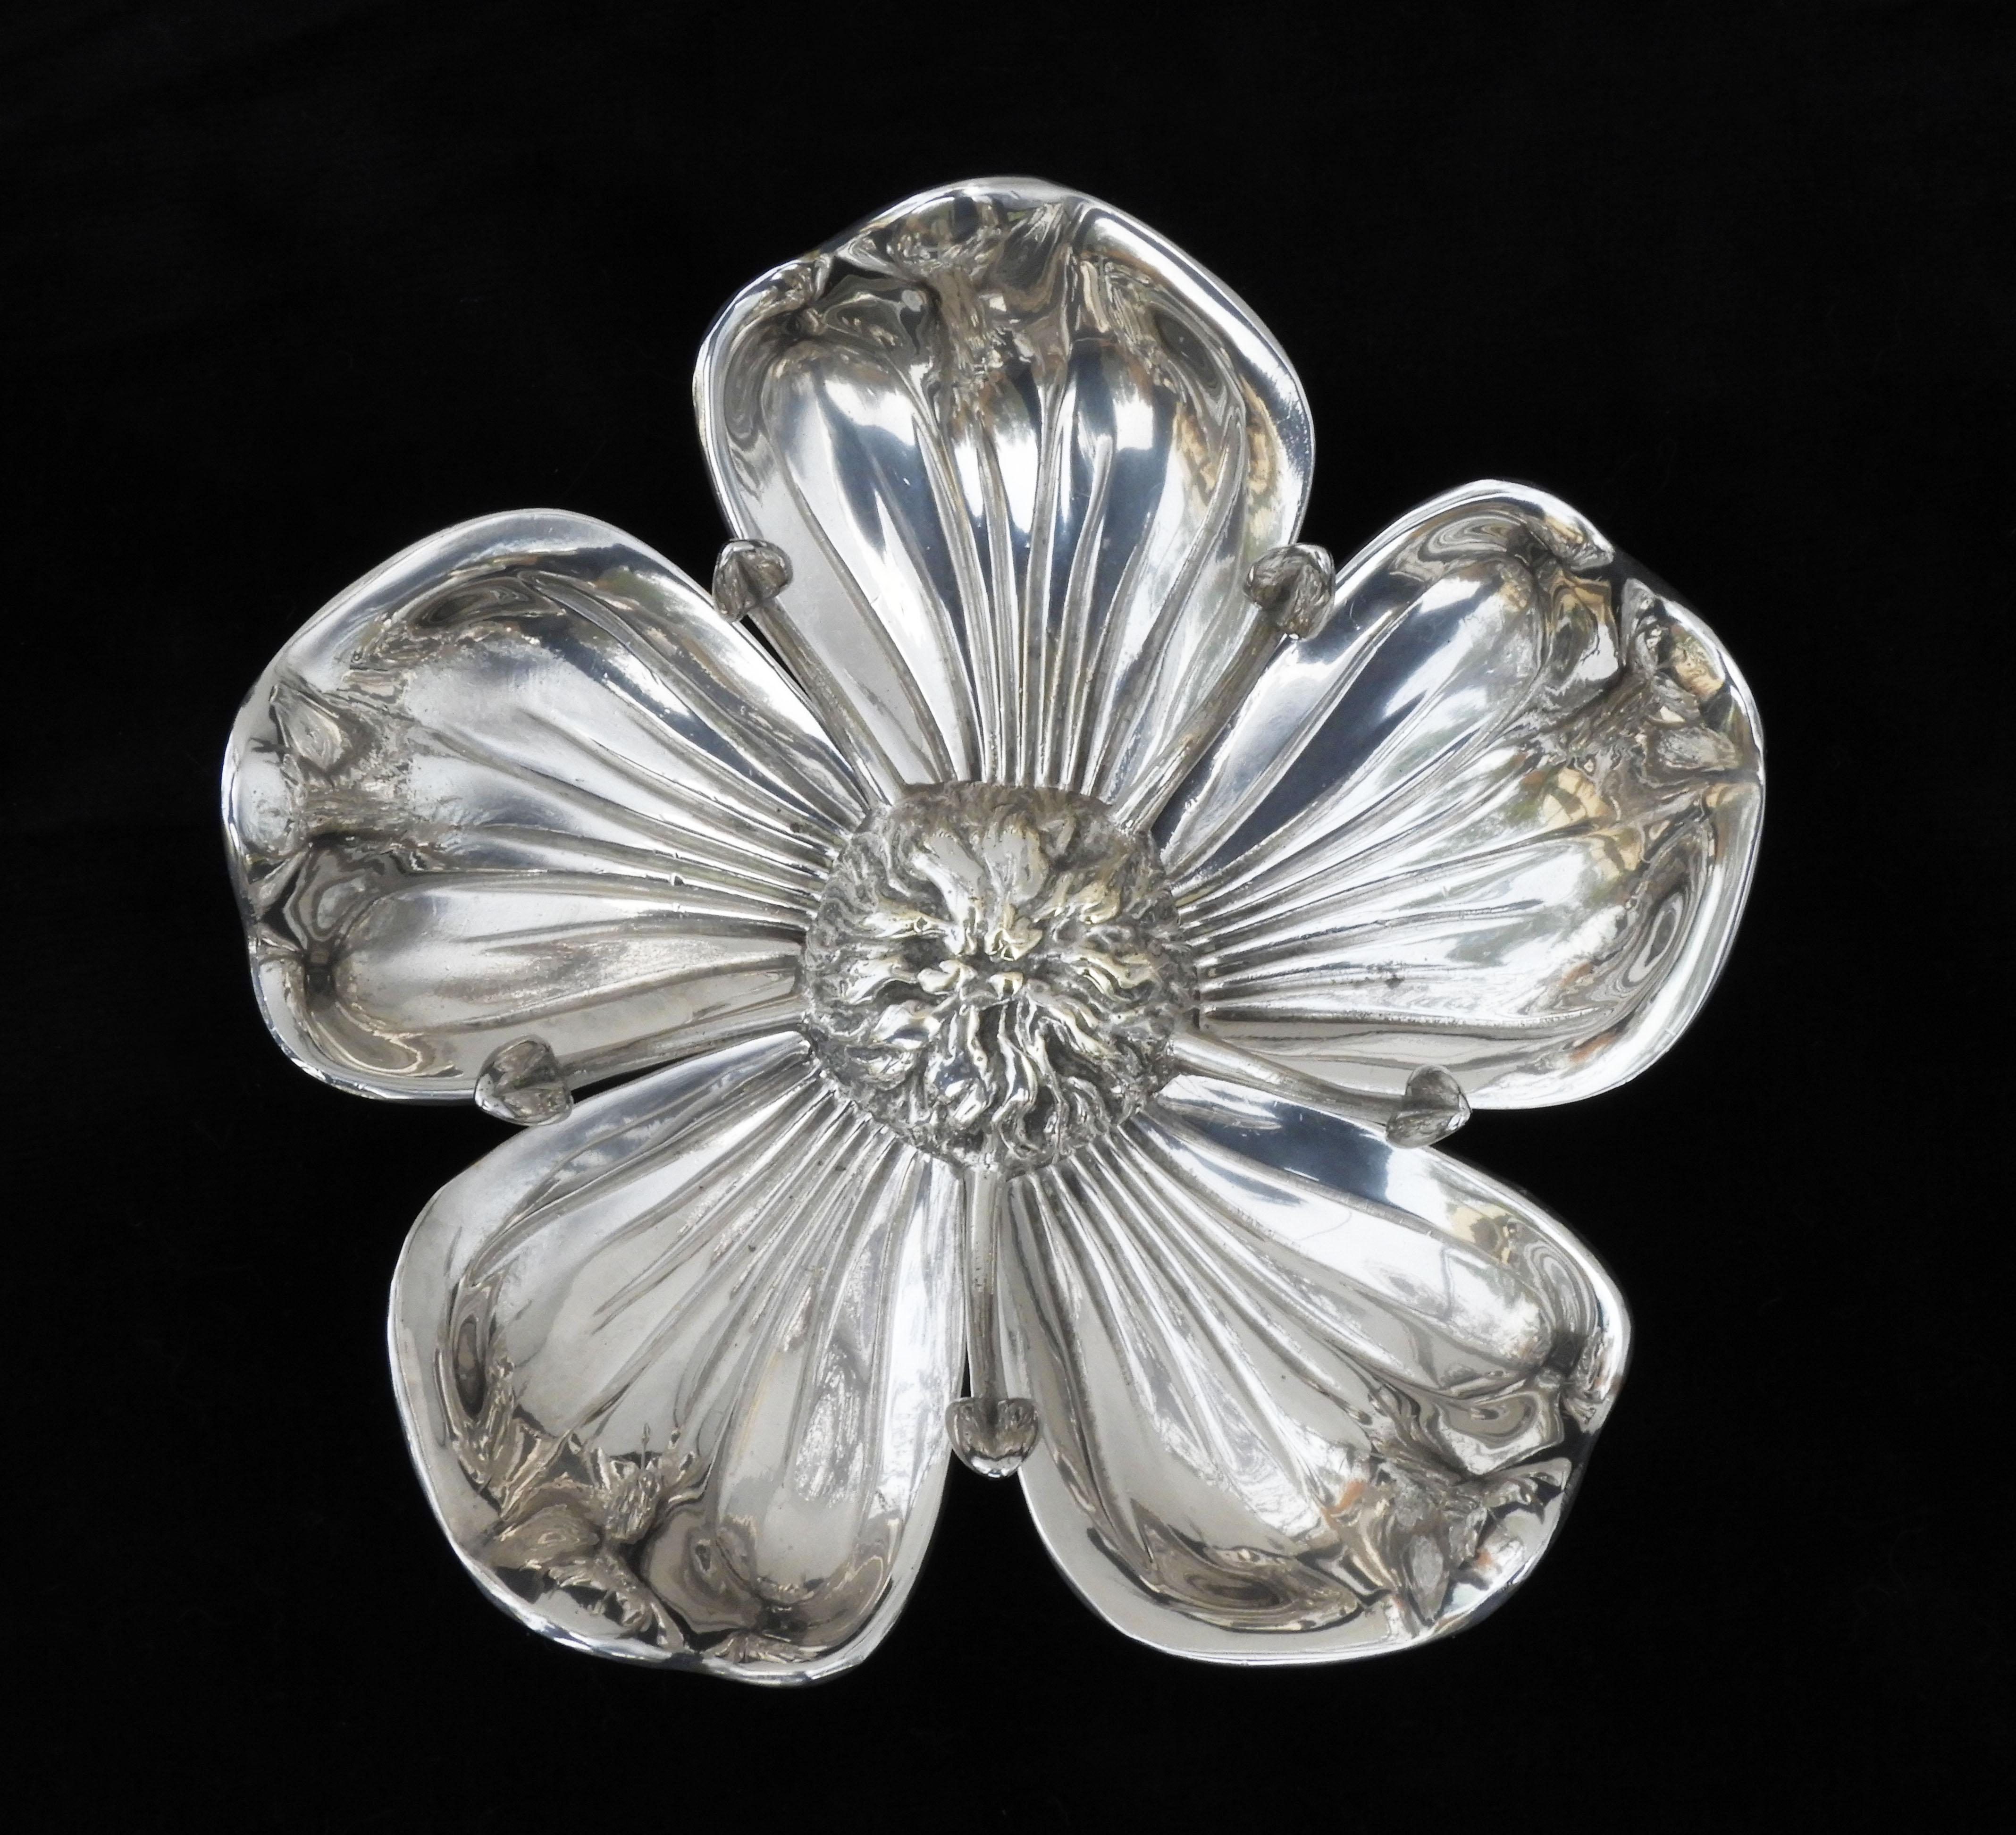 Fabulous Gucci style floral ashtray C1960s Italy.  Beautifully sculptured and cleverly designed piece that sheds its petals to become five individual ashtrays.  A gorgeous addition to any cocktail table or drinks trolley that will work equally well